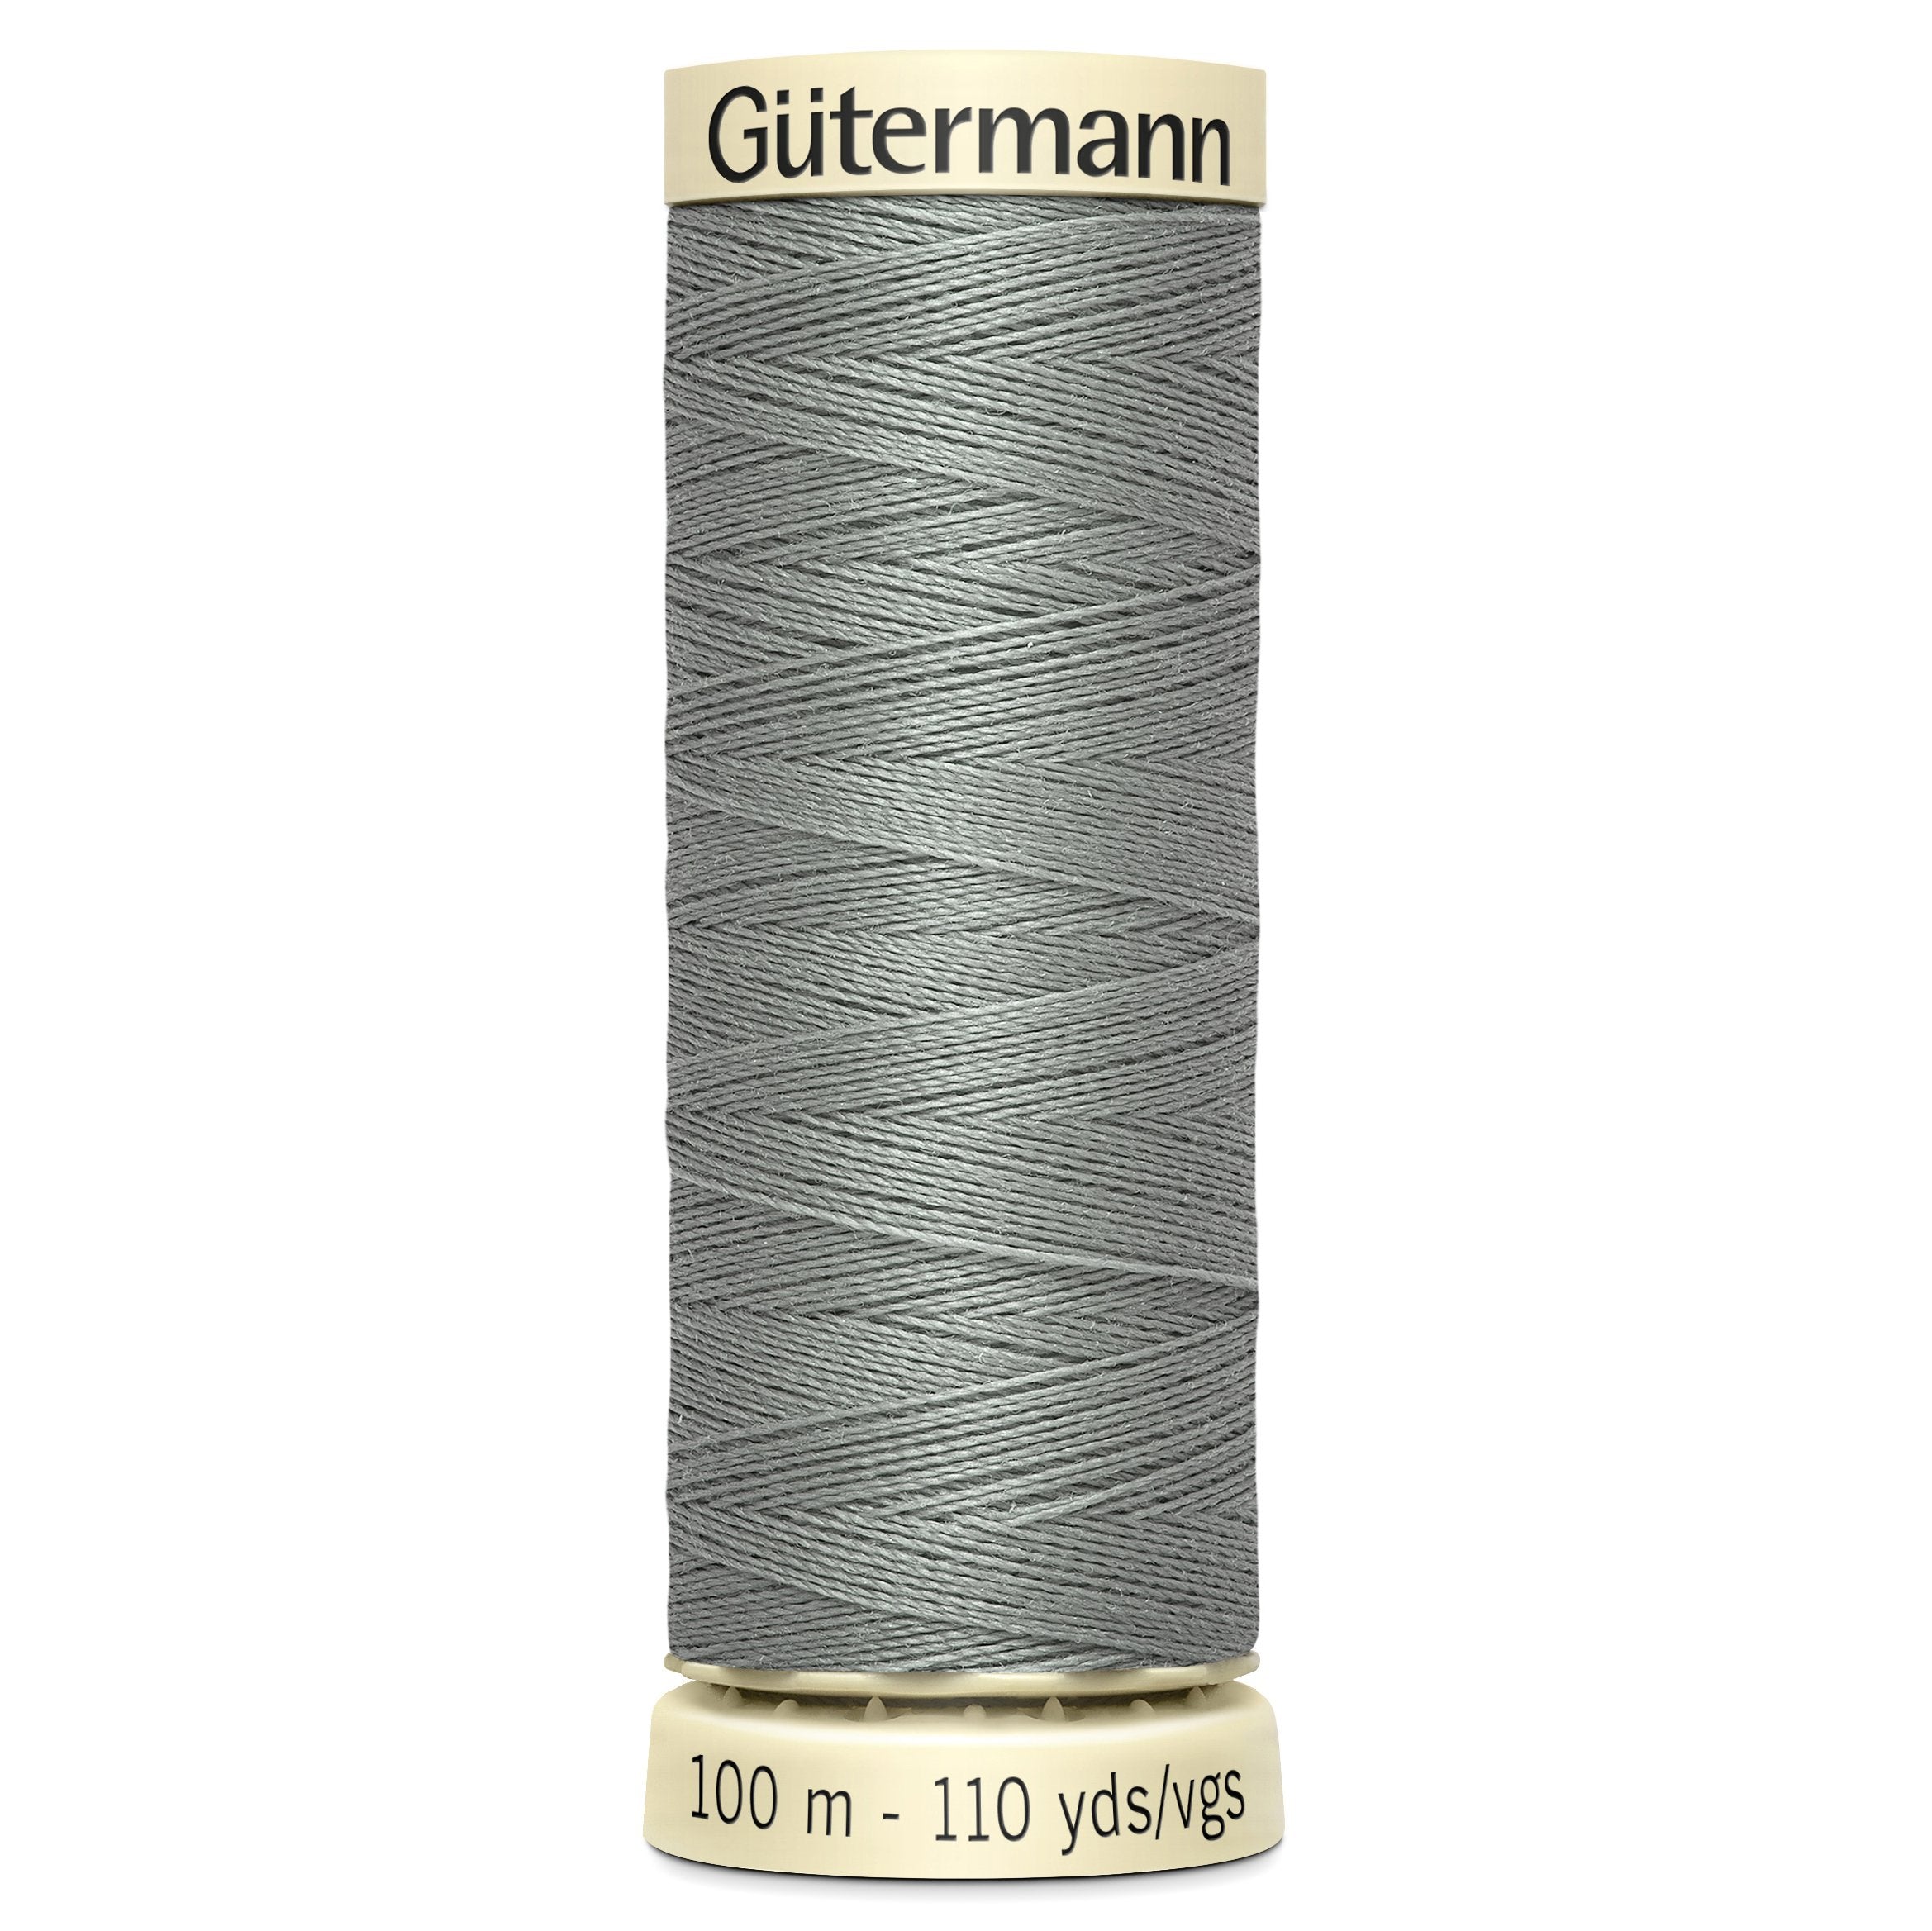 Gutermann Sew All Thread colour 634 Grey from Jaycotts Sewing Supplies